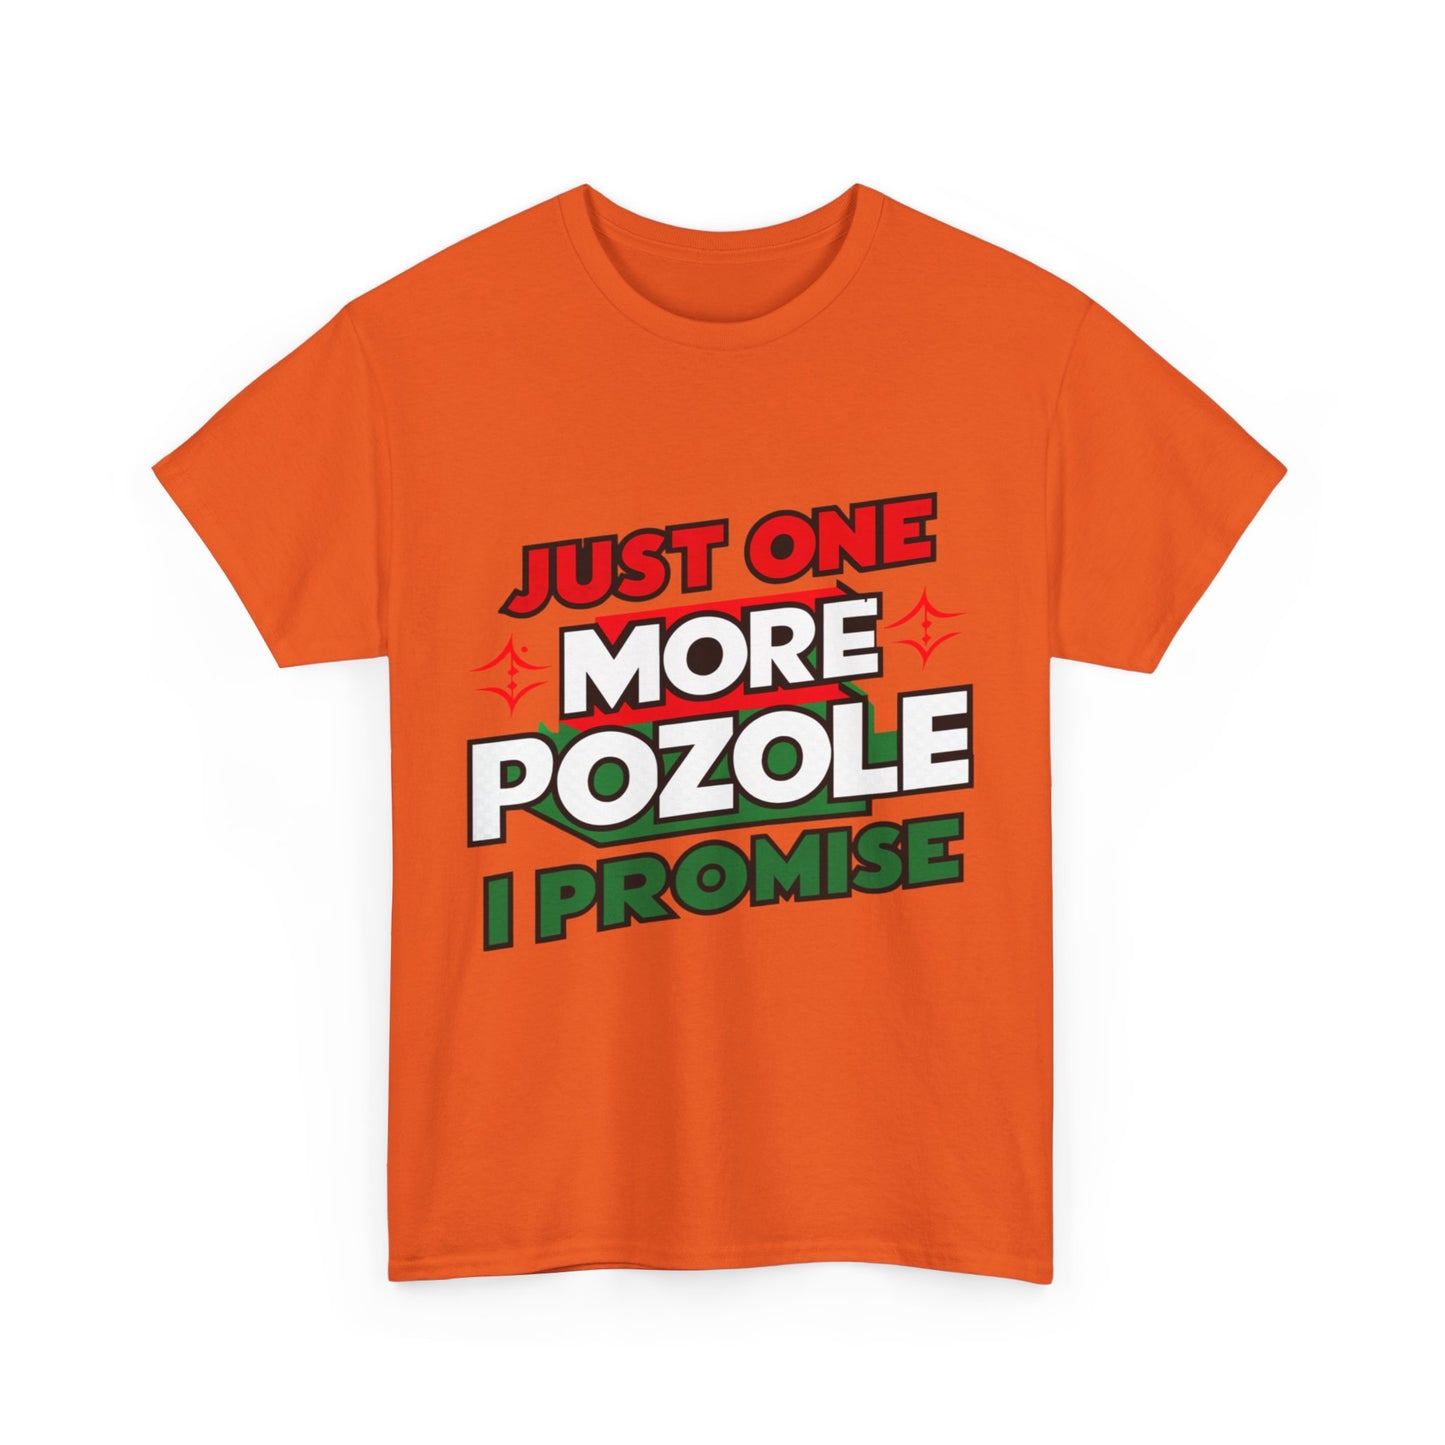 Just One More Pozole I Promise Mexican Food Graphic Unisex Heavy Cotton Tee Cotton Funny Humorous Graphic Soft Premium Unisex Men Women Orange T-shirt Birthday Gift-30